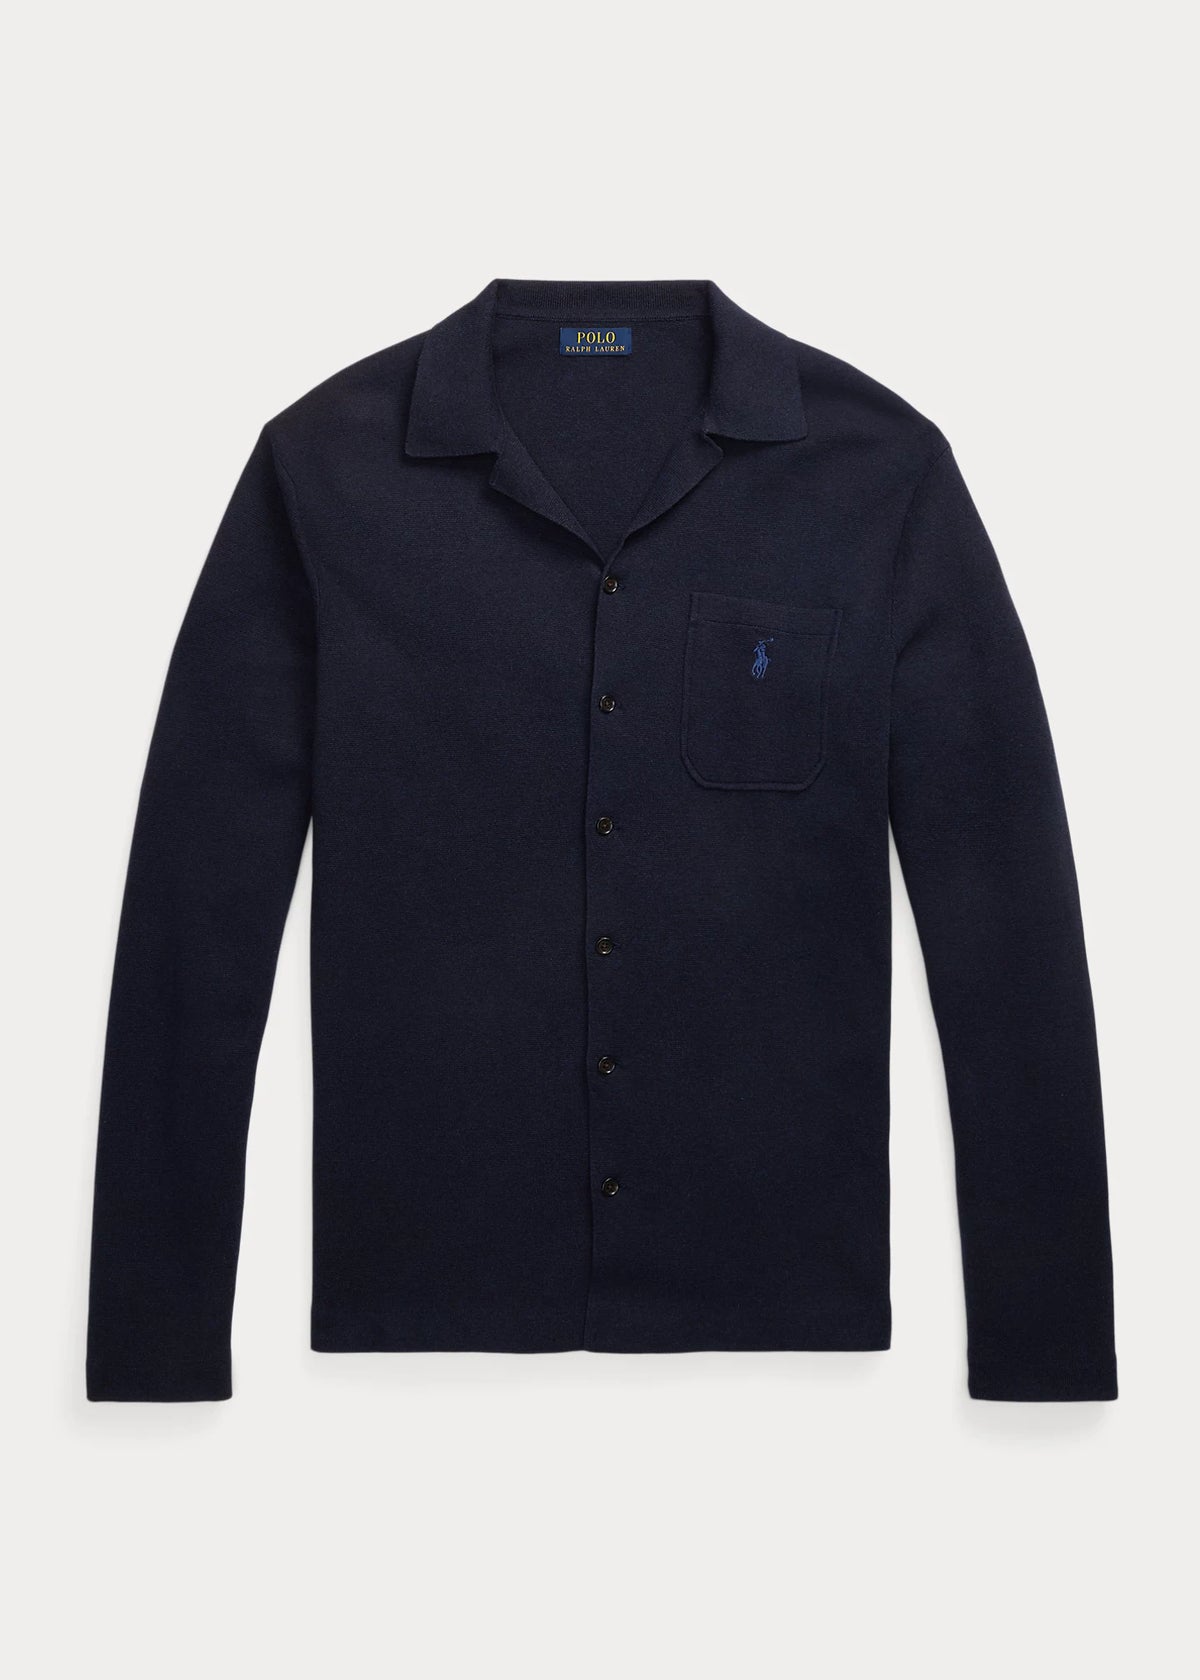 Collared Full Button Cardigan - Navy